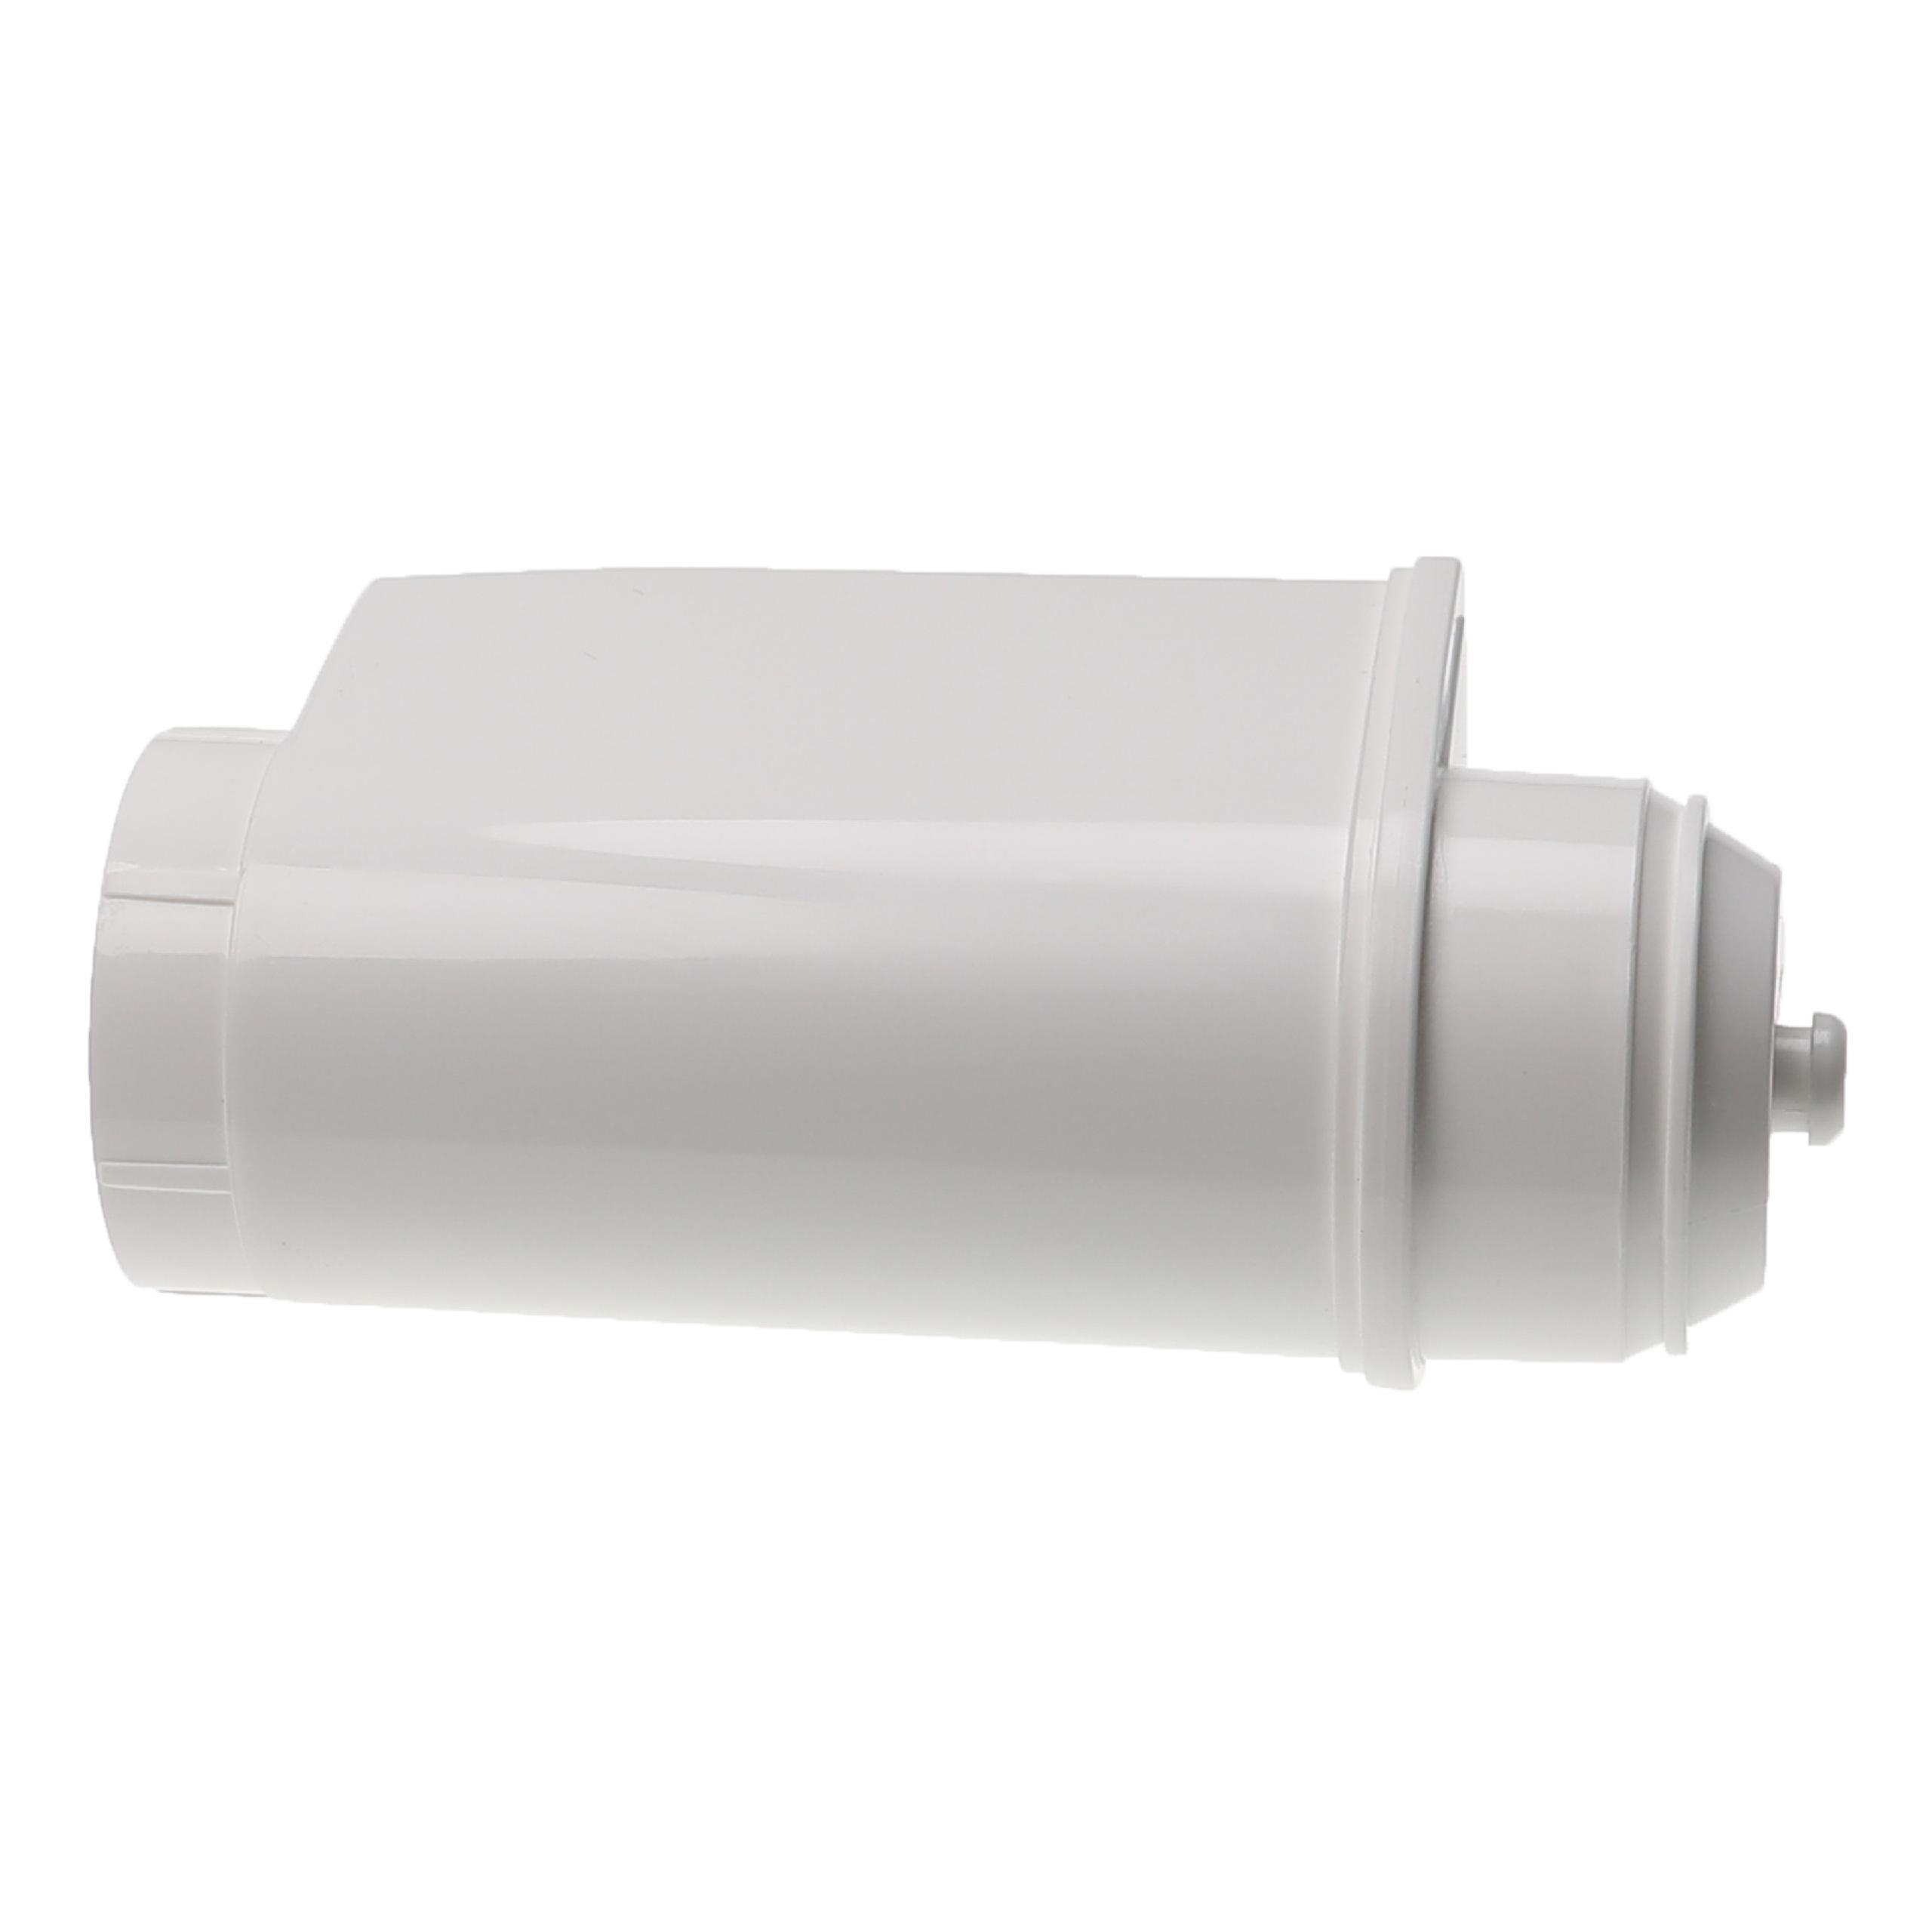 Water Filter replaces Siemens TZ70033 for Bosch Coffee Machine etc. - White